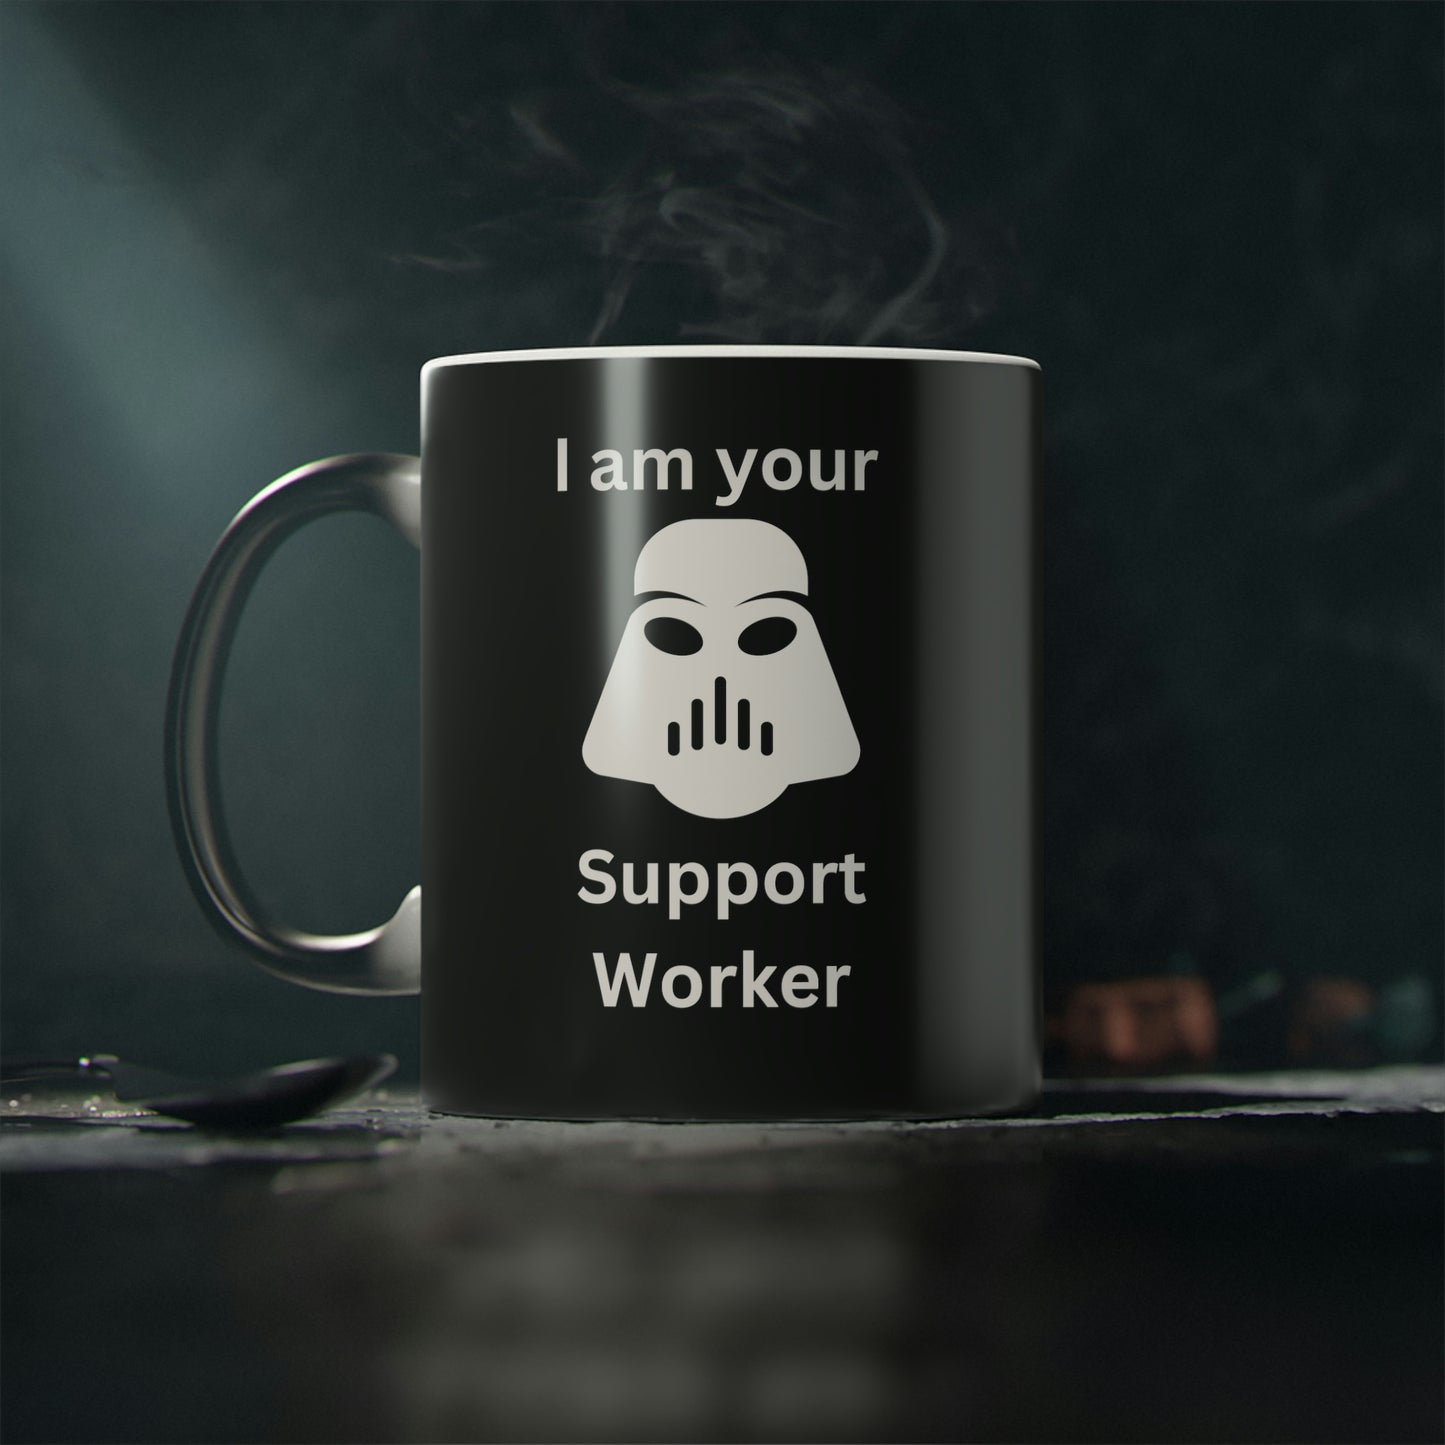 I am your Support Worker